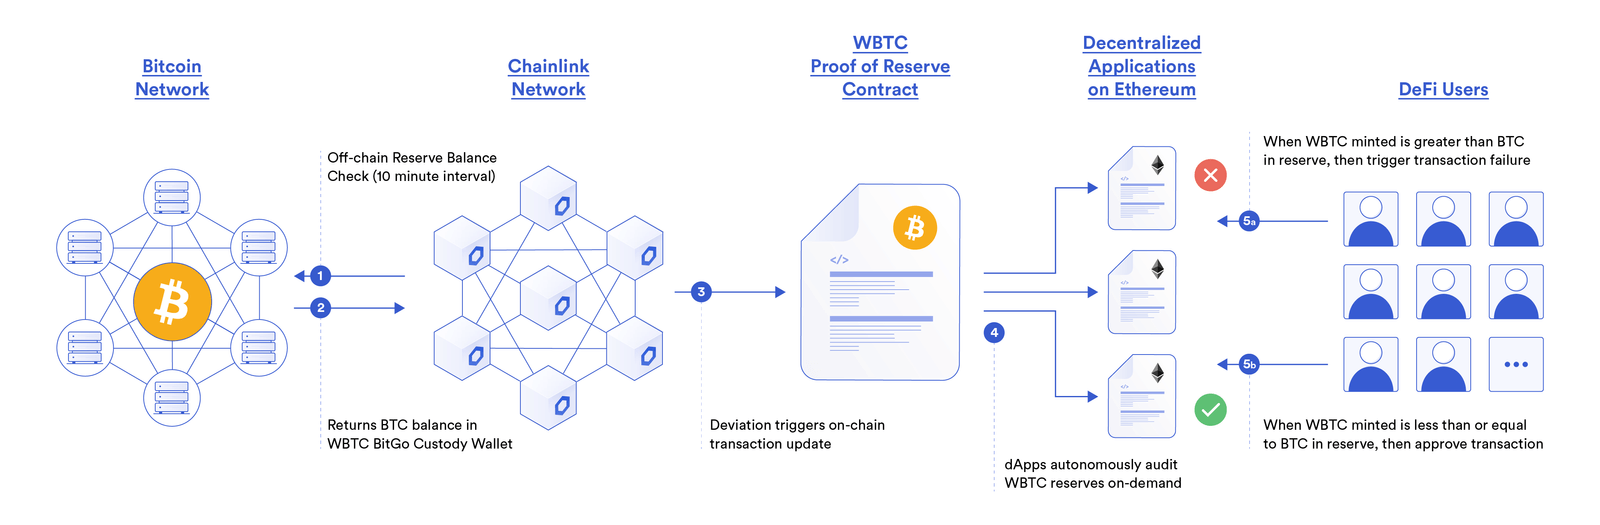 A diagram showing a Chainlink Proof of Reserve data feed for WBTC.